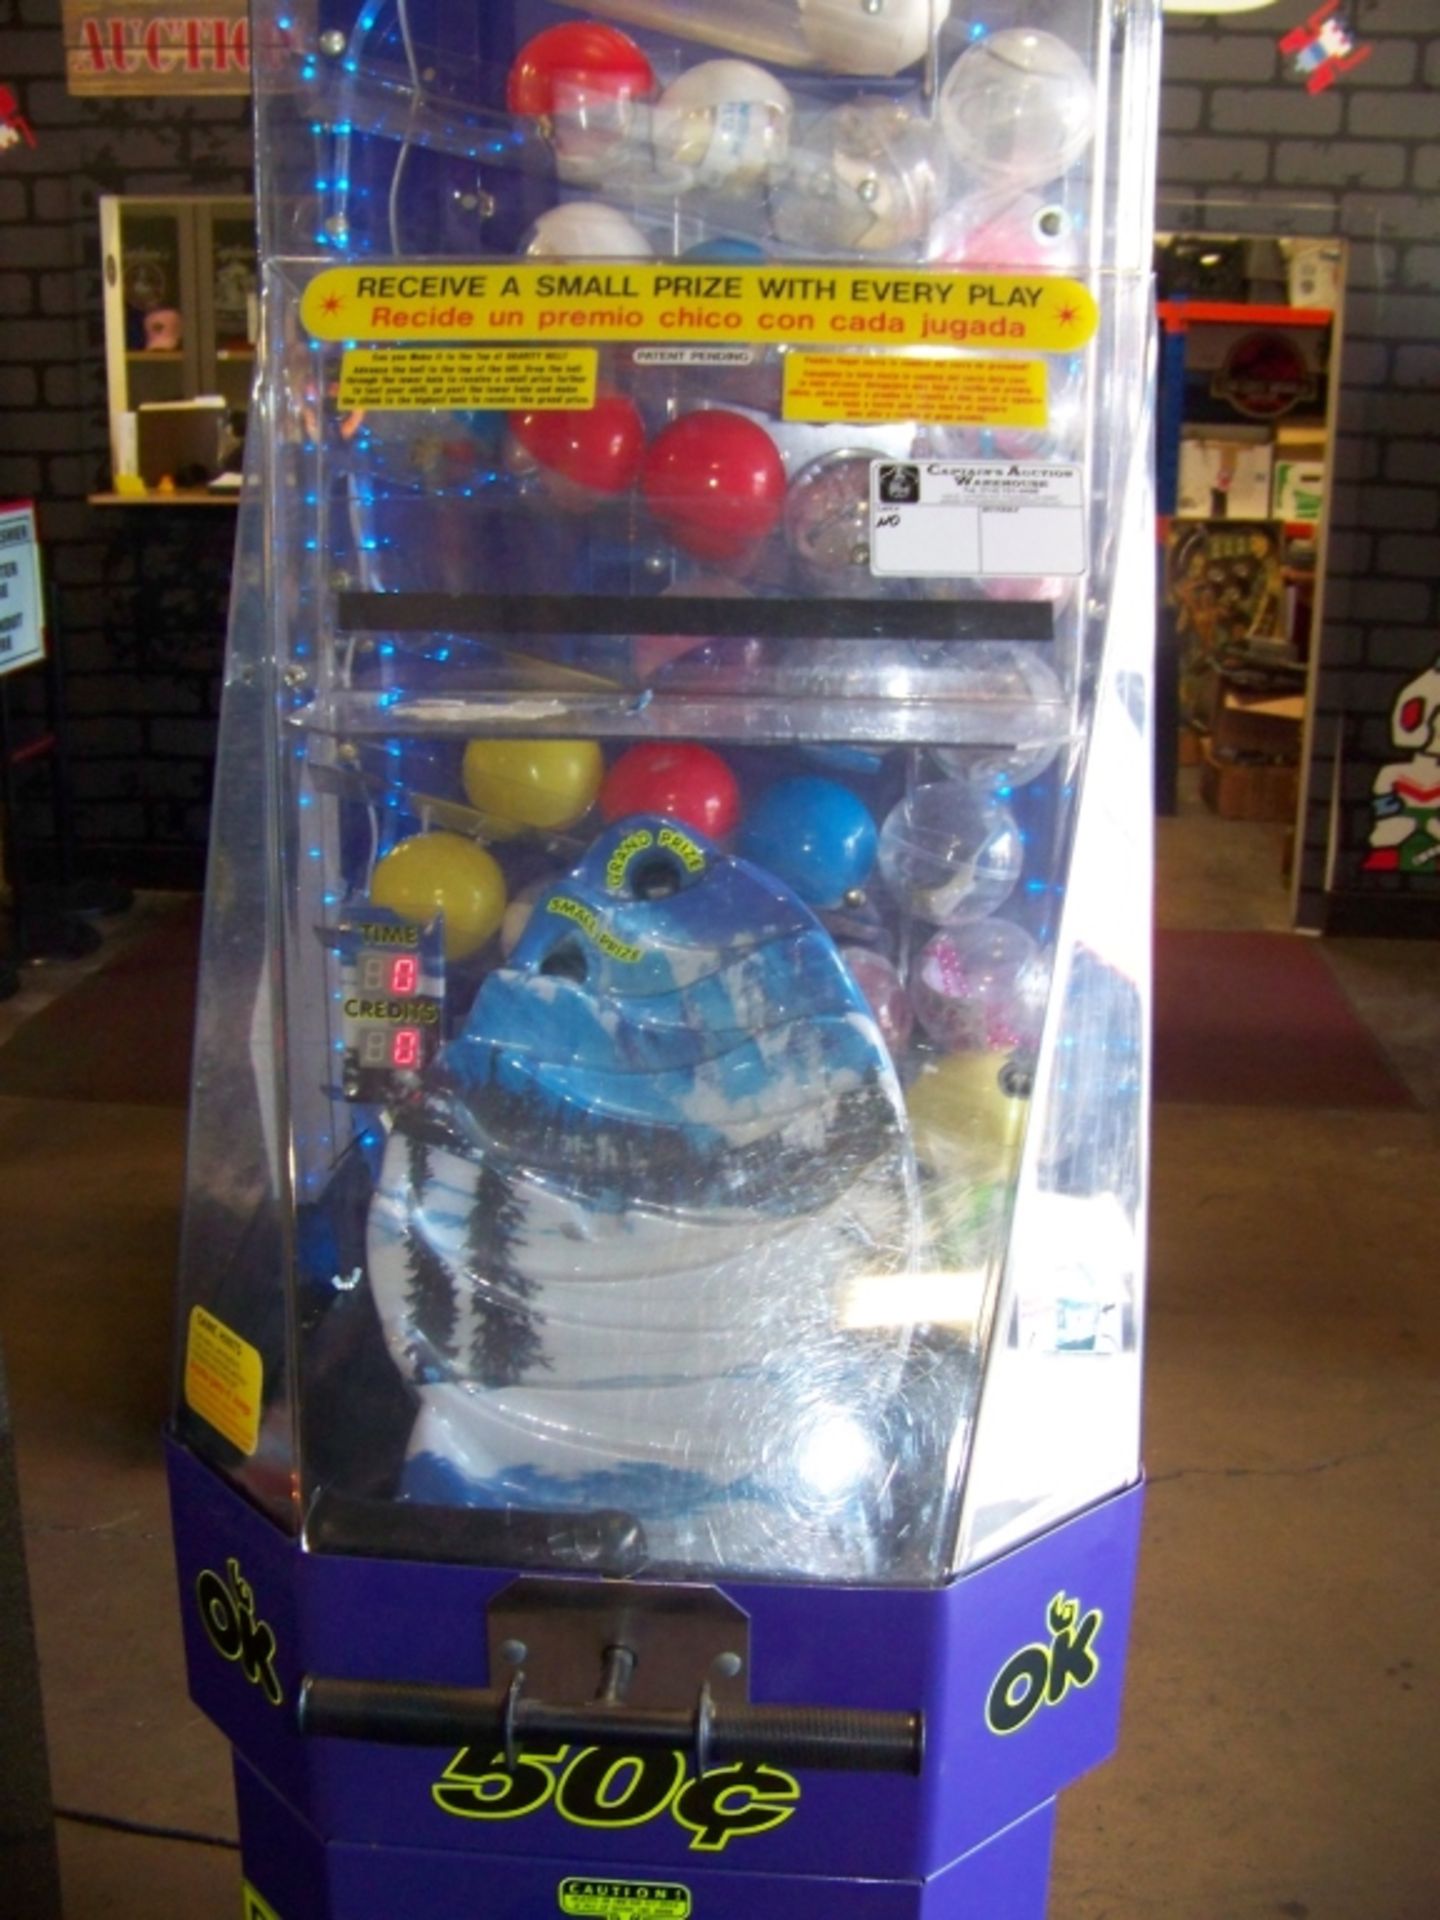 GRAVITY HILL PRIZE REDEMPTION GAME OK MFG - Image 2 of 3